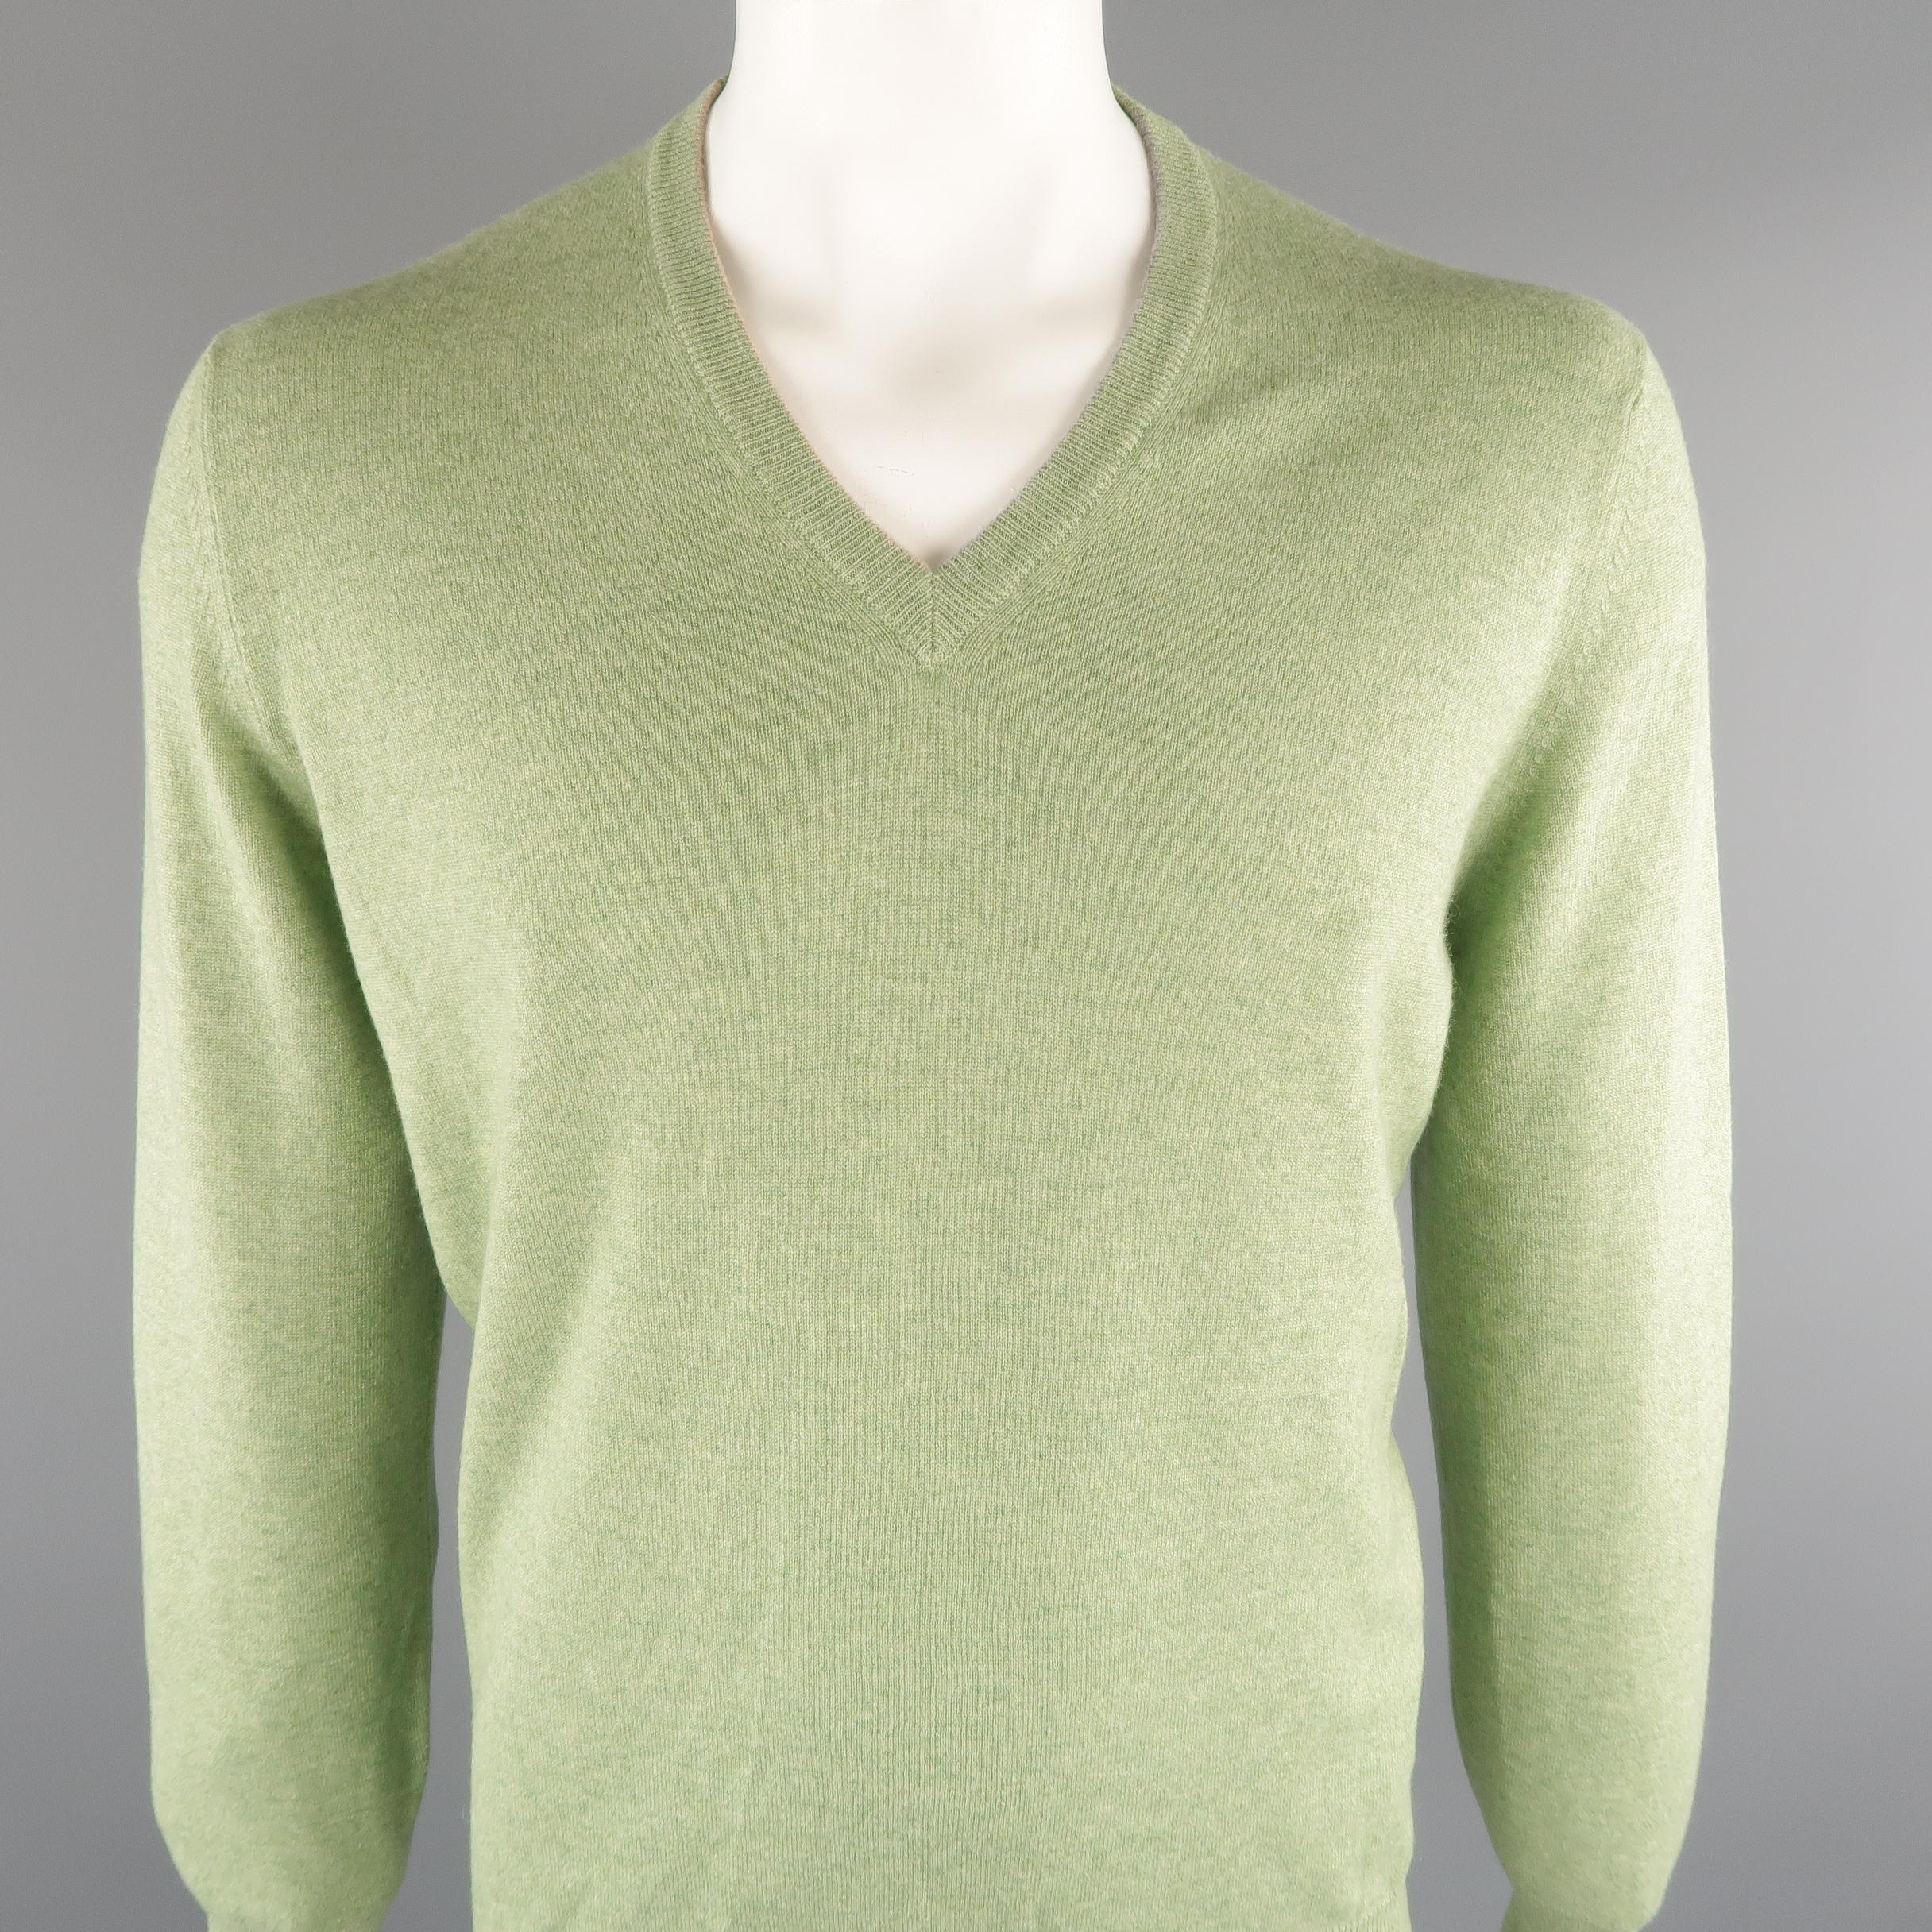 BRUNELLO CUCINELLI sweater comes in 100% cashmere in a green tone, ribbed knit, V-neck, with ribbed cuff and waistband. Made in Italy.
 
New with Tags.
Marked: 54 IT
 
Measurements:
 
Shoulder: 18 in.
Chest: 46 in.
Sleeve: 27 in.
Length: 28 in.